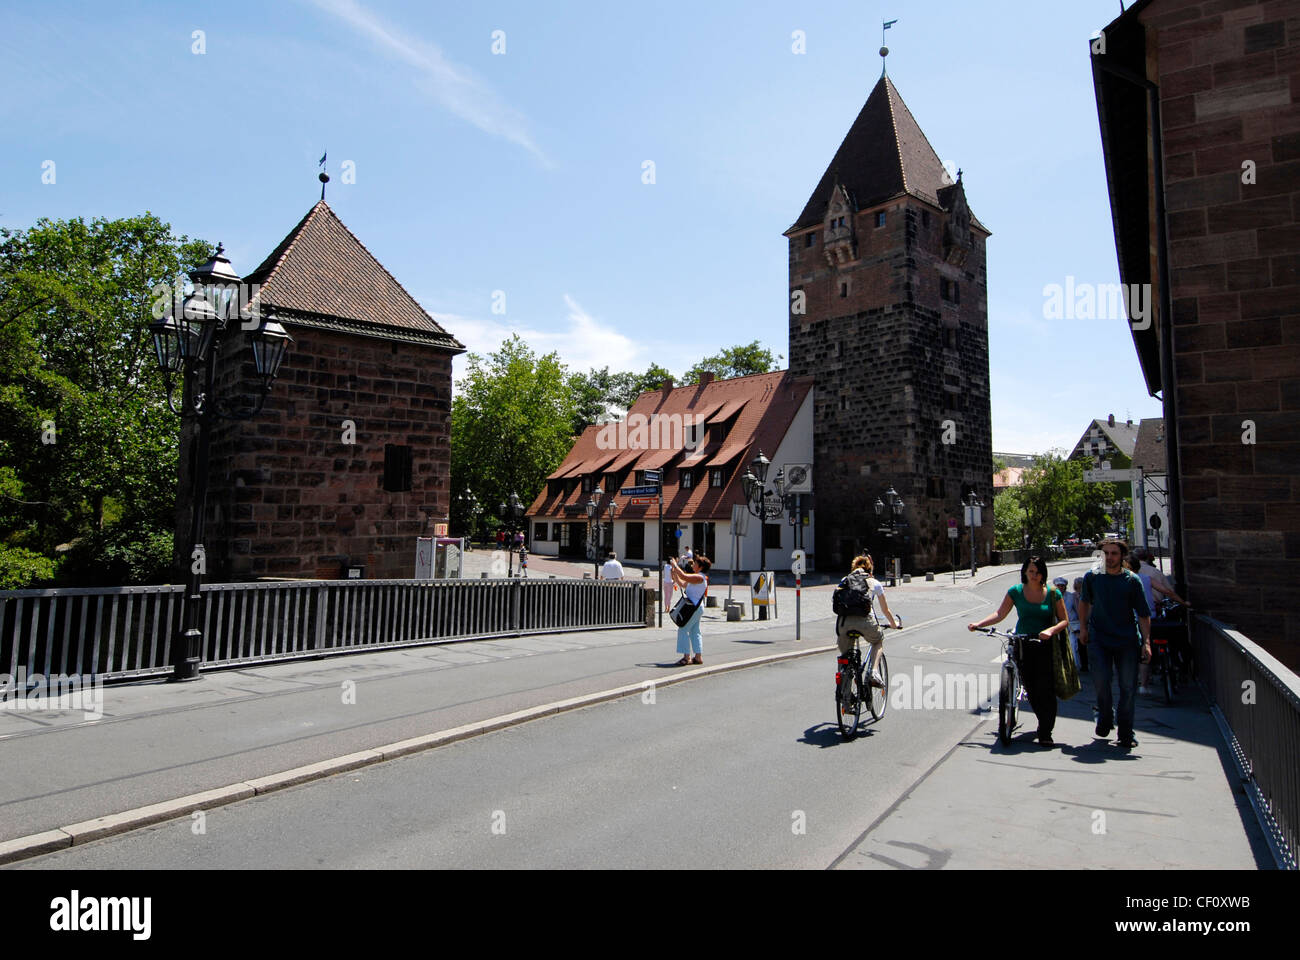 The Schuldturm tower (The Debtors Tower) built in 1323 on the Spitalbrucke across the river Pegnitz in Nuremberg, Germany Stock Photo